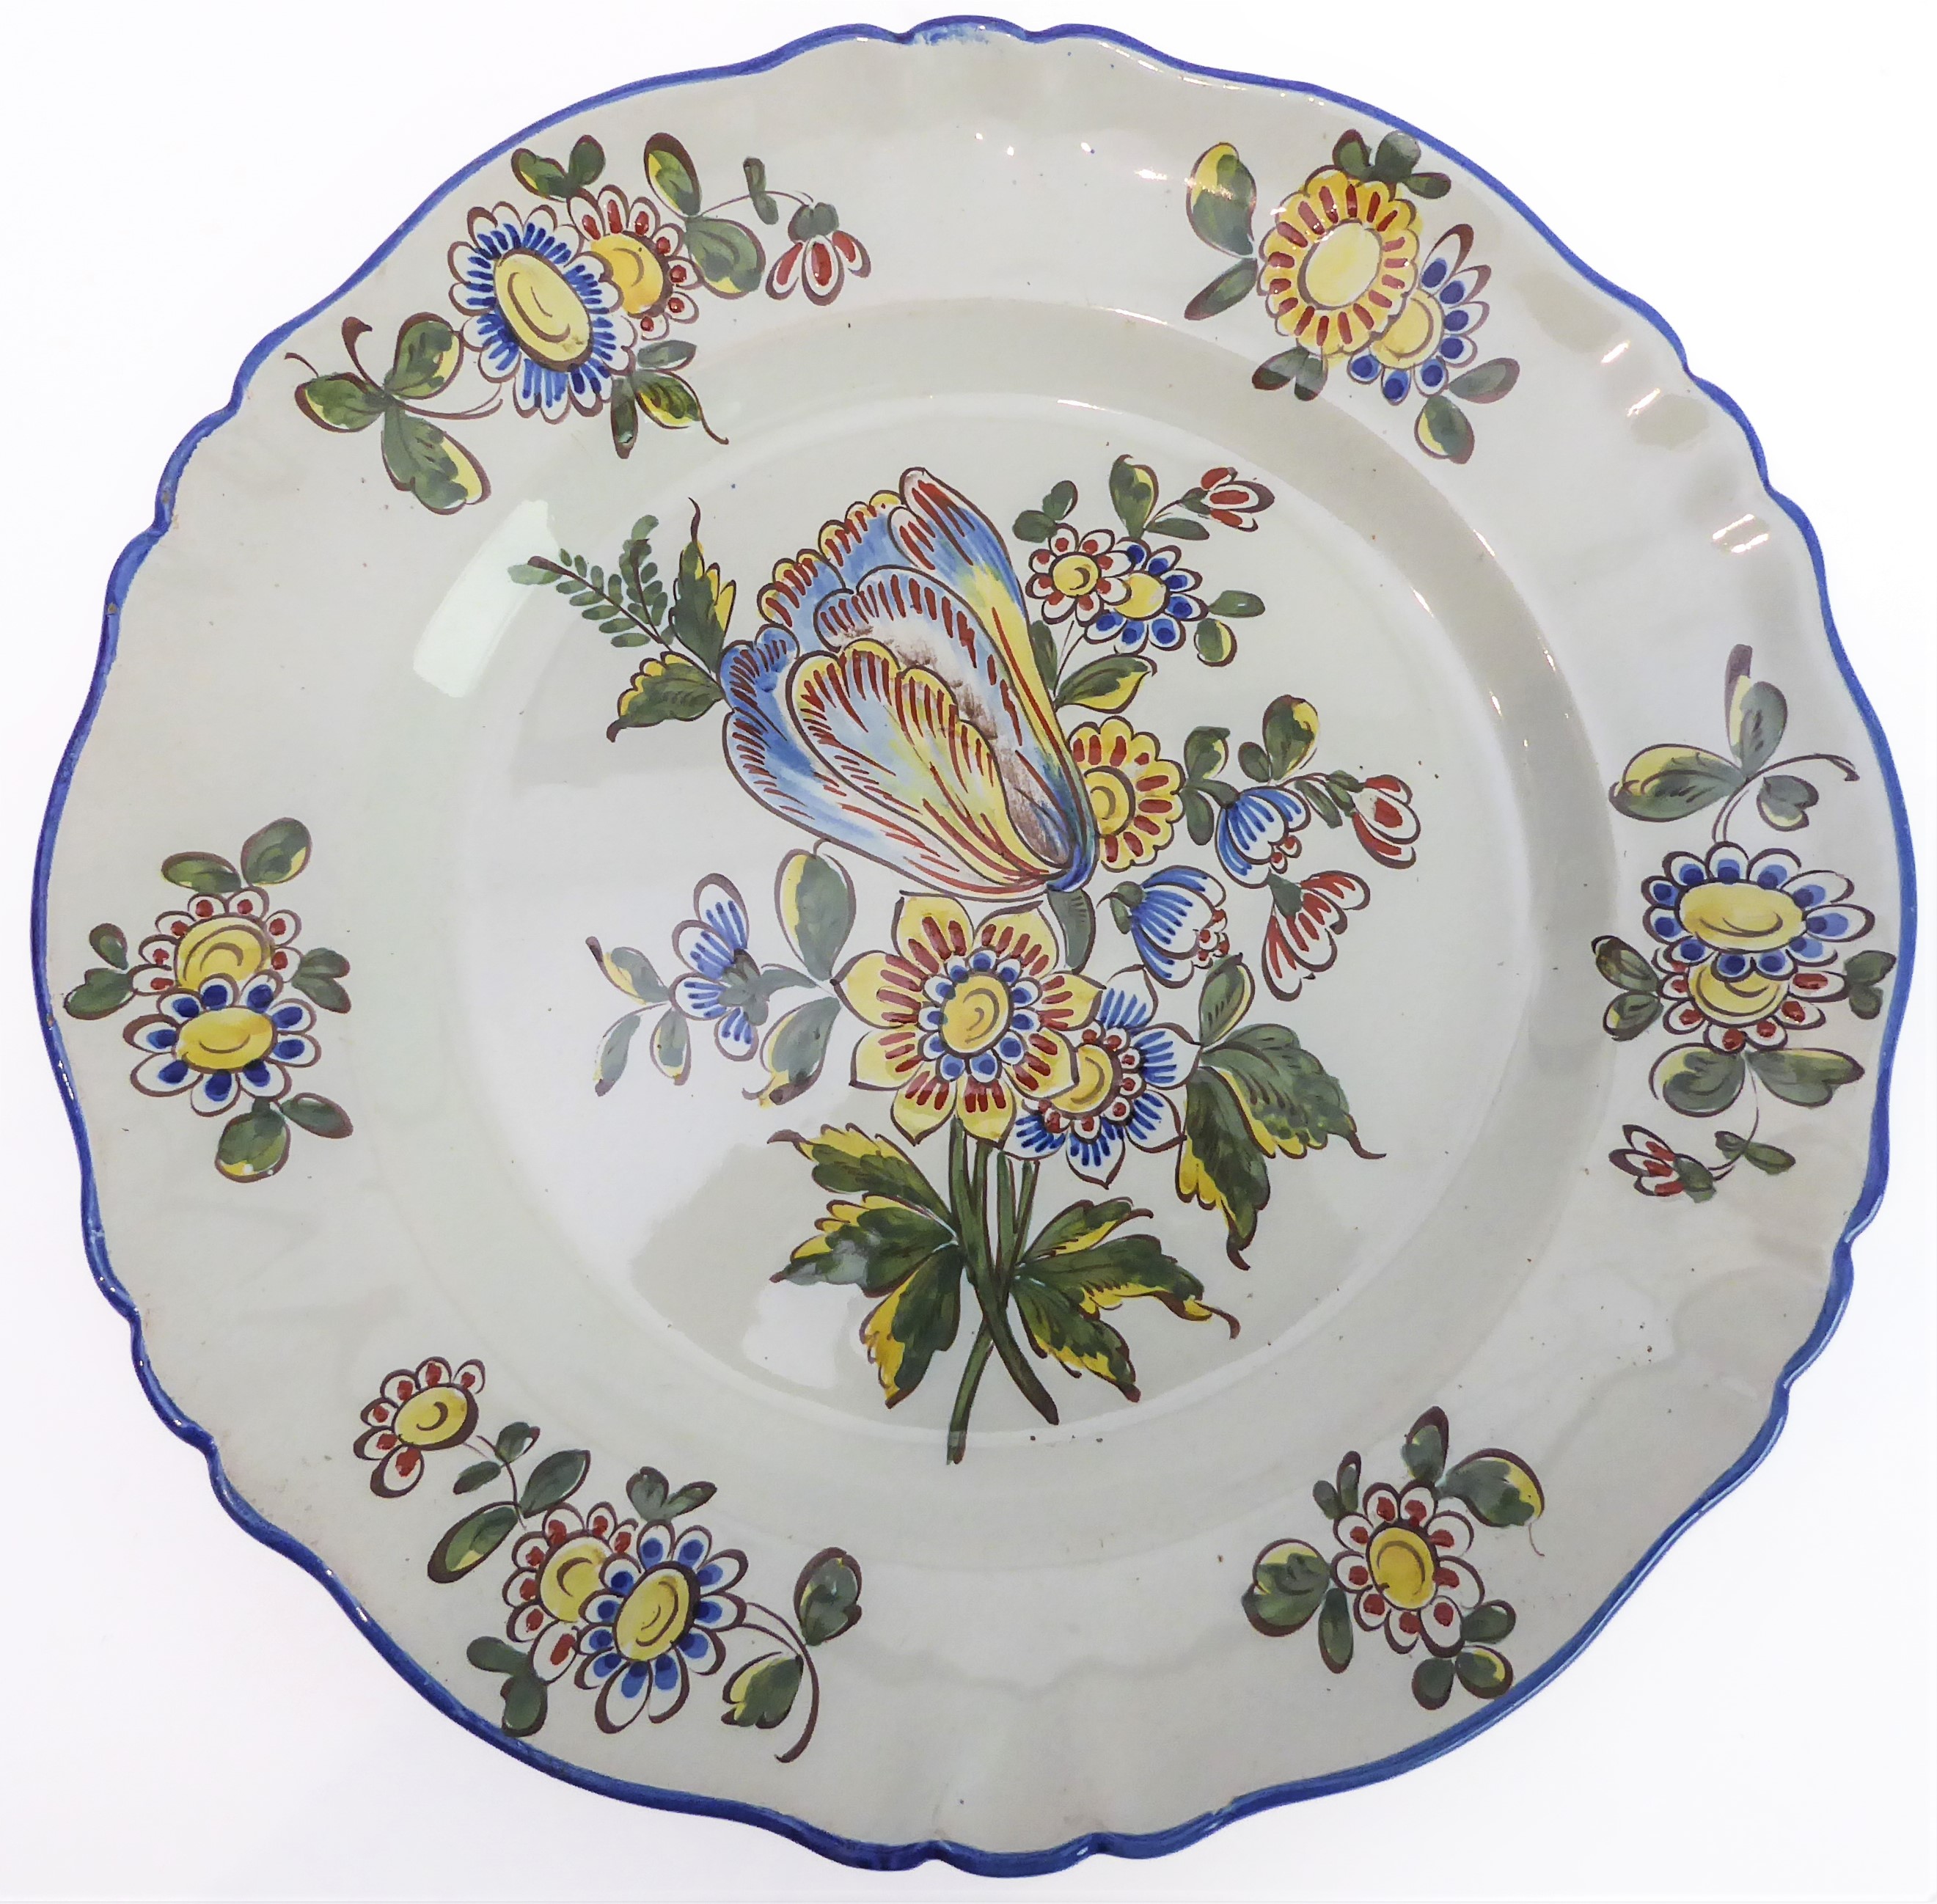 A set of eleven 19th century faience plates by Keller & Guerin at Luneville (early marks). (The - Image 6 of 17